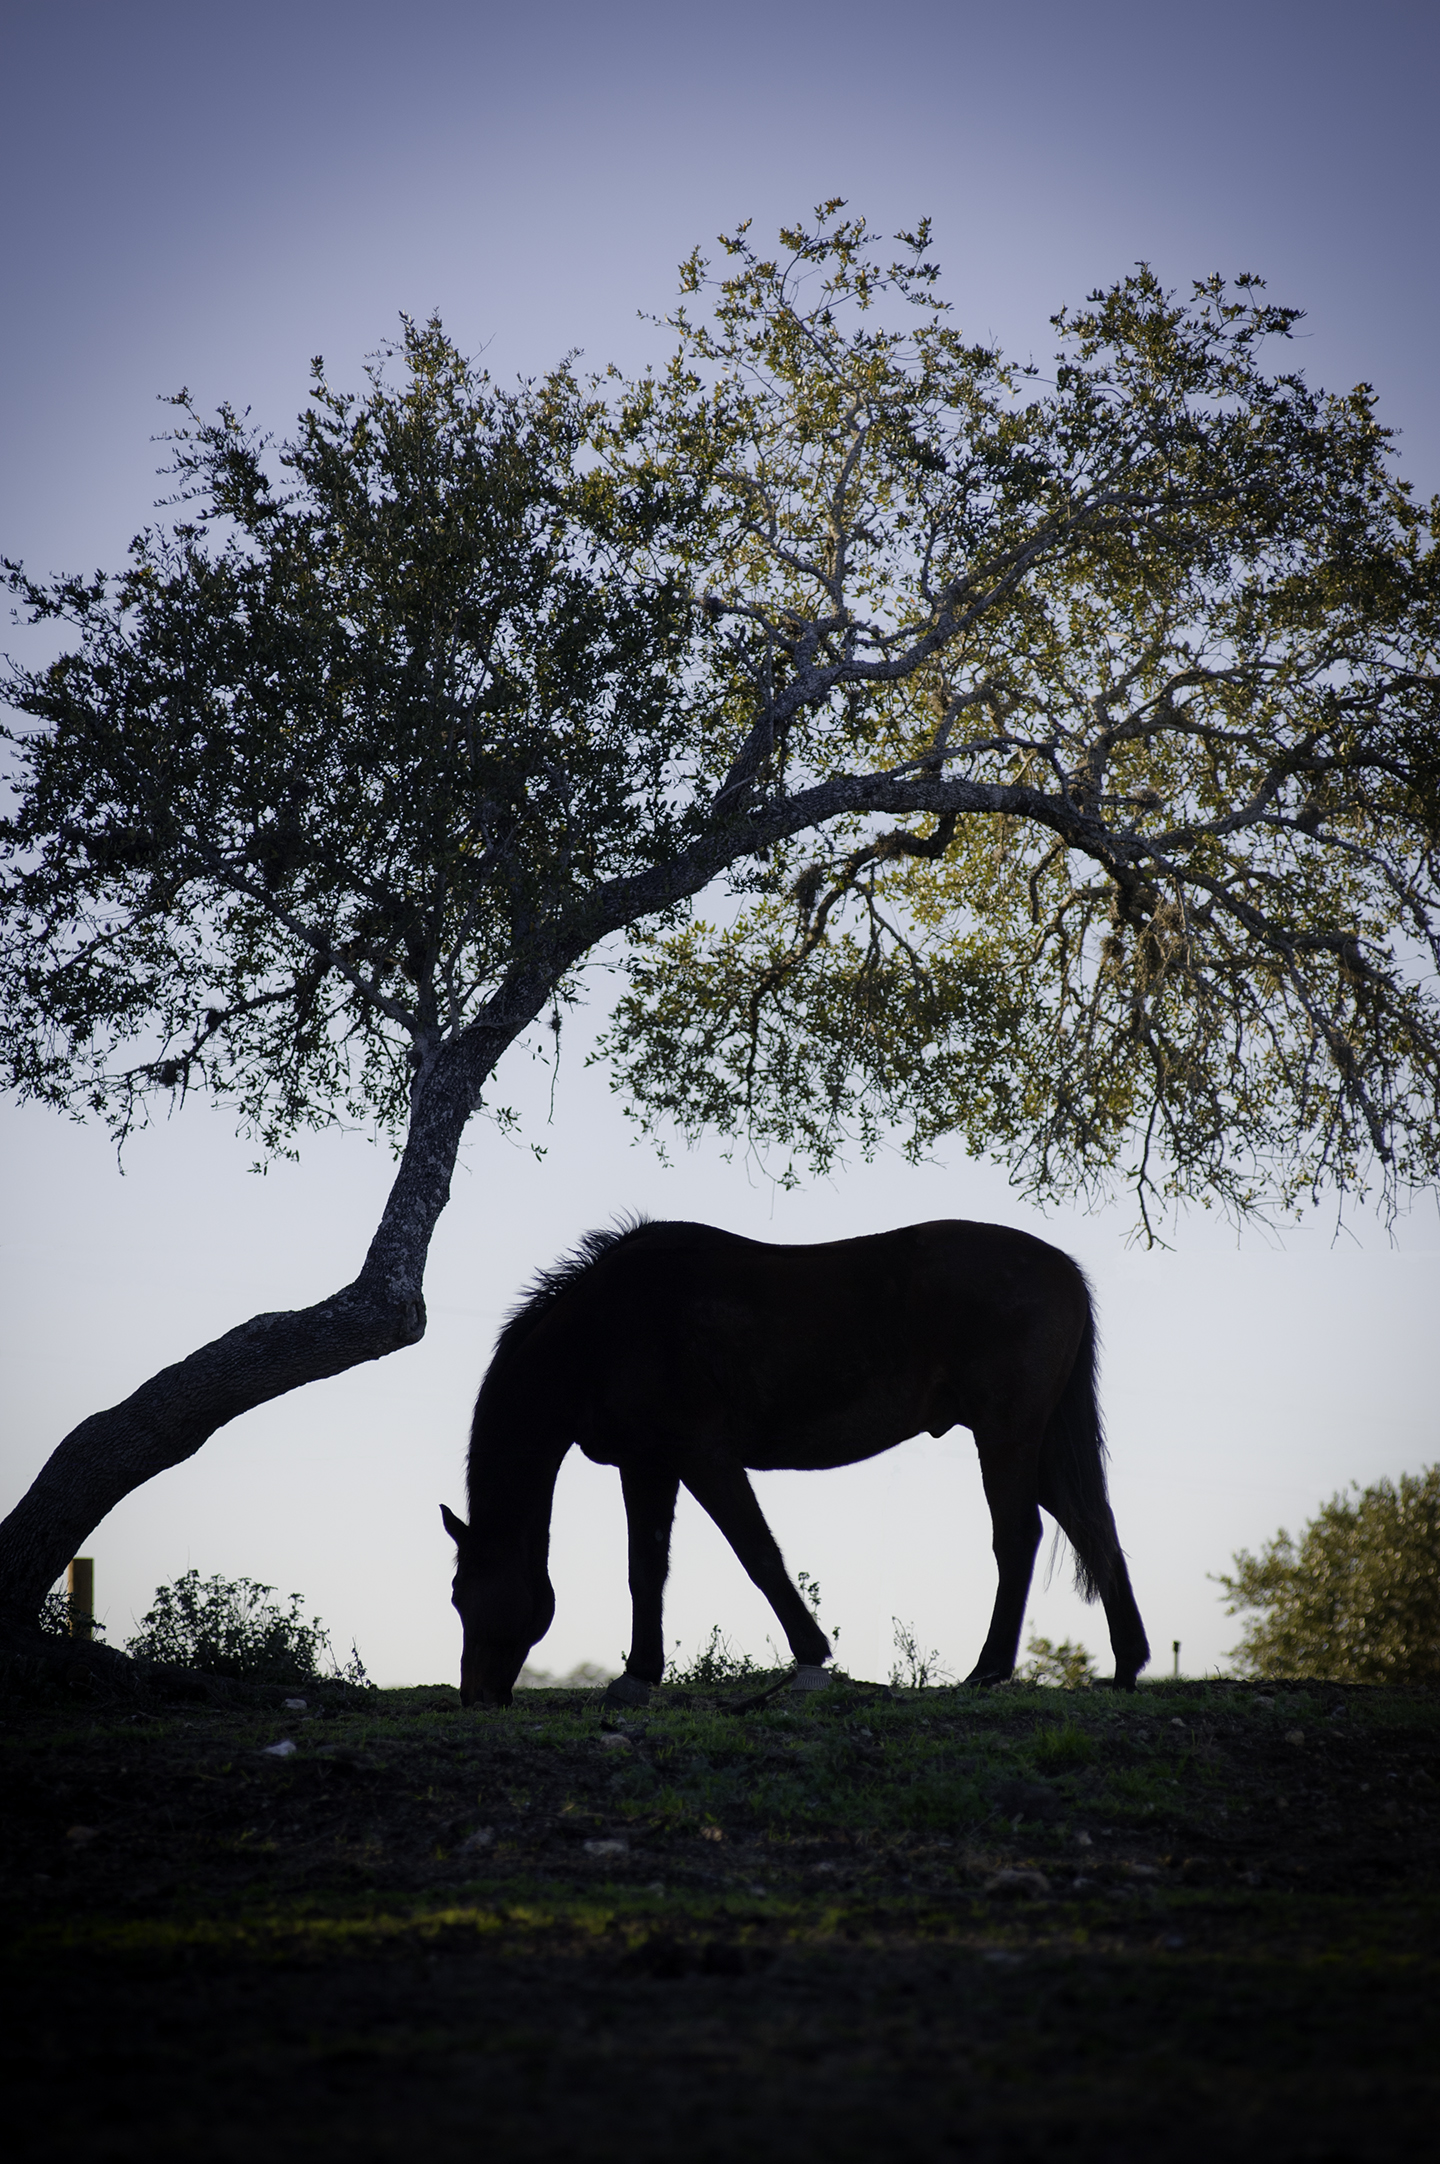 A horse in silhouette grazes in a pasture under a tree at sunset.